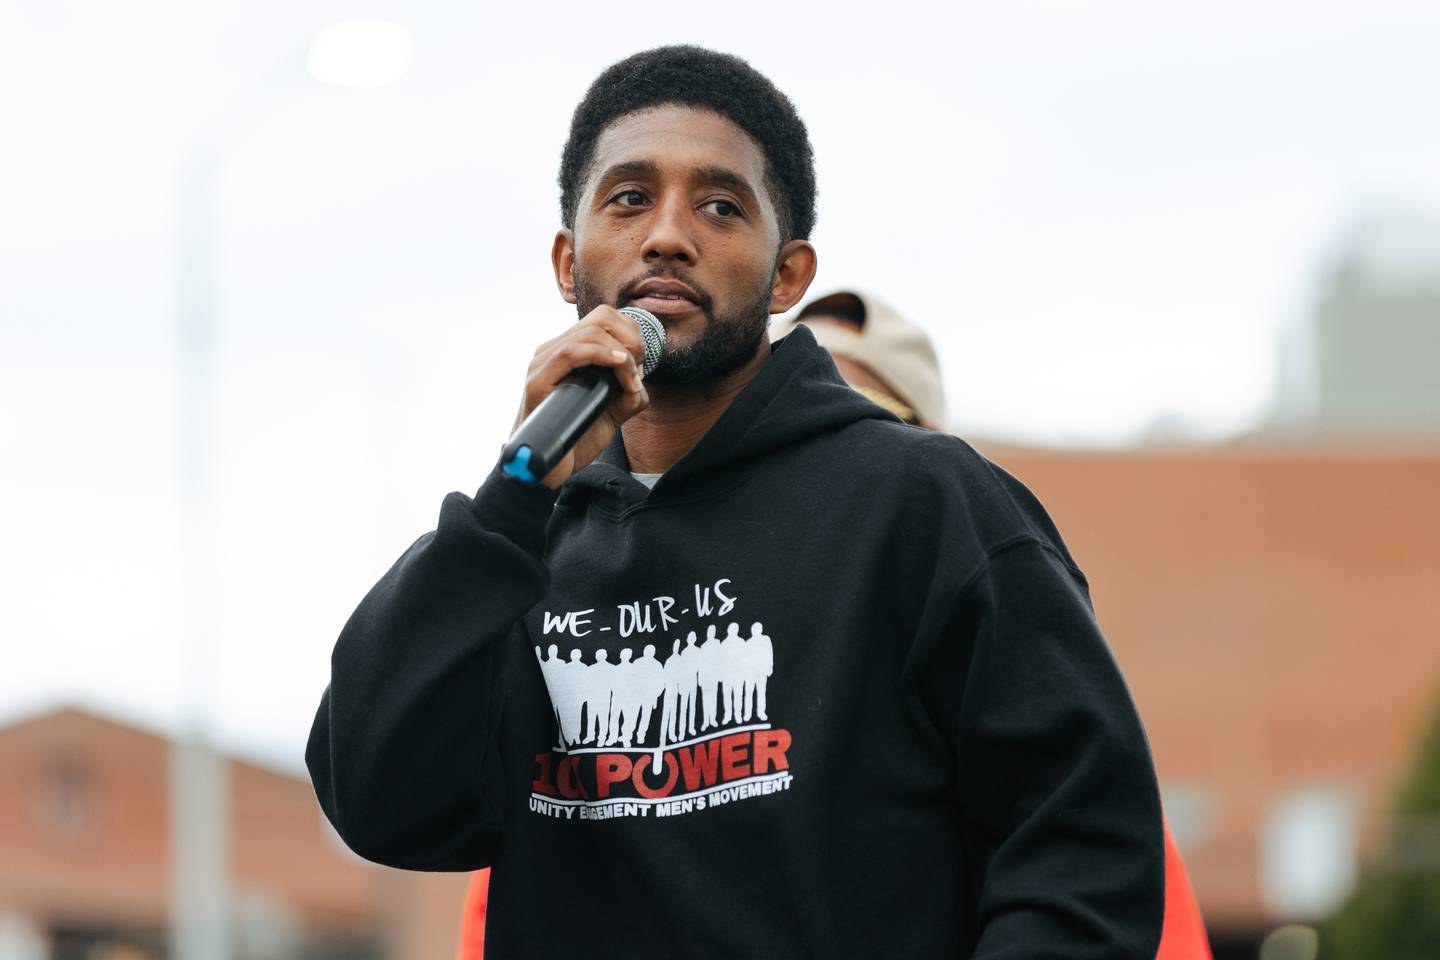 Baltimore Mayor Brandon Scott addresses a crowd of a few hundred attendants, organizers and community workers at an anti-gun violence event organized by We Our Us, on Saturday, Oct. 21, 2023 in Baltimore, MD.